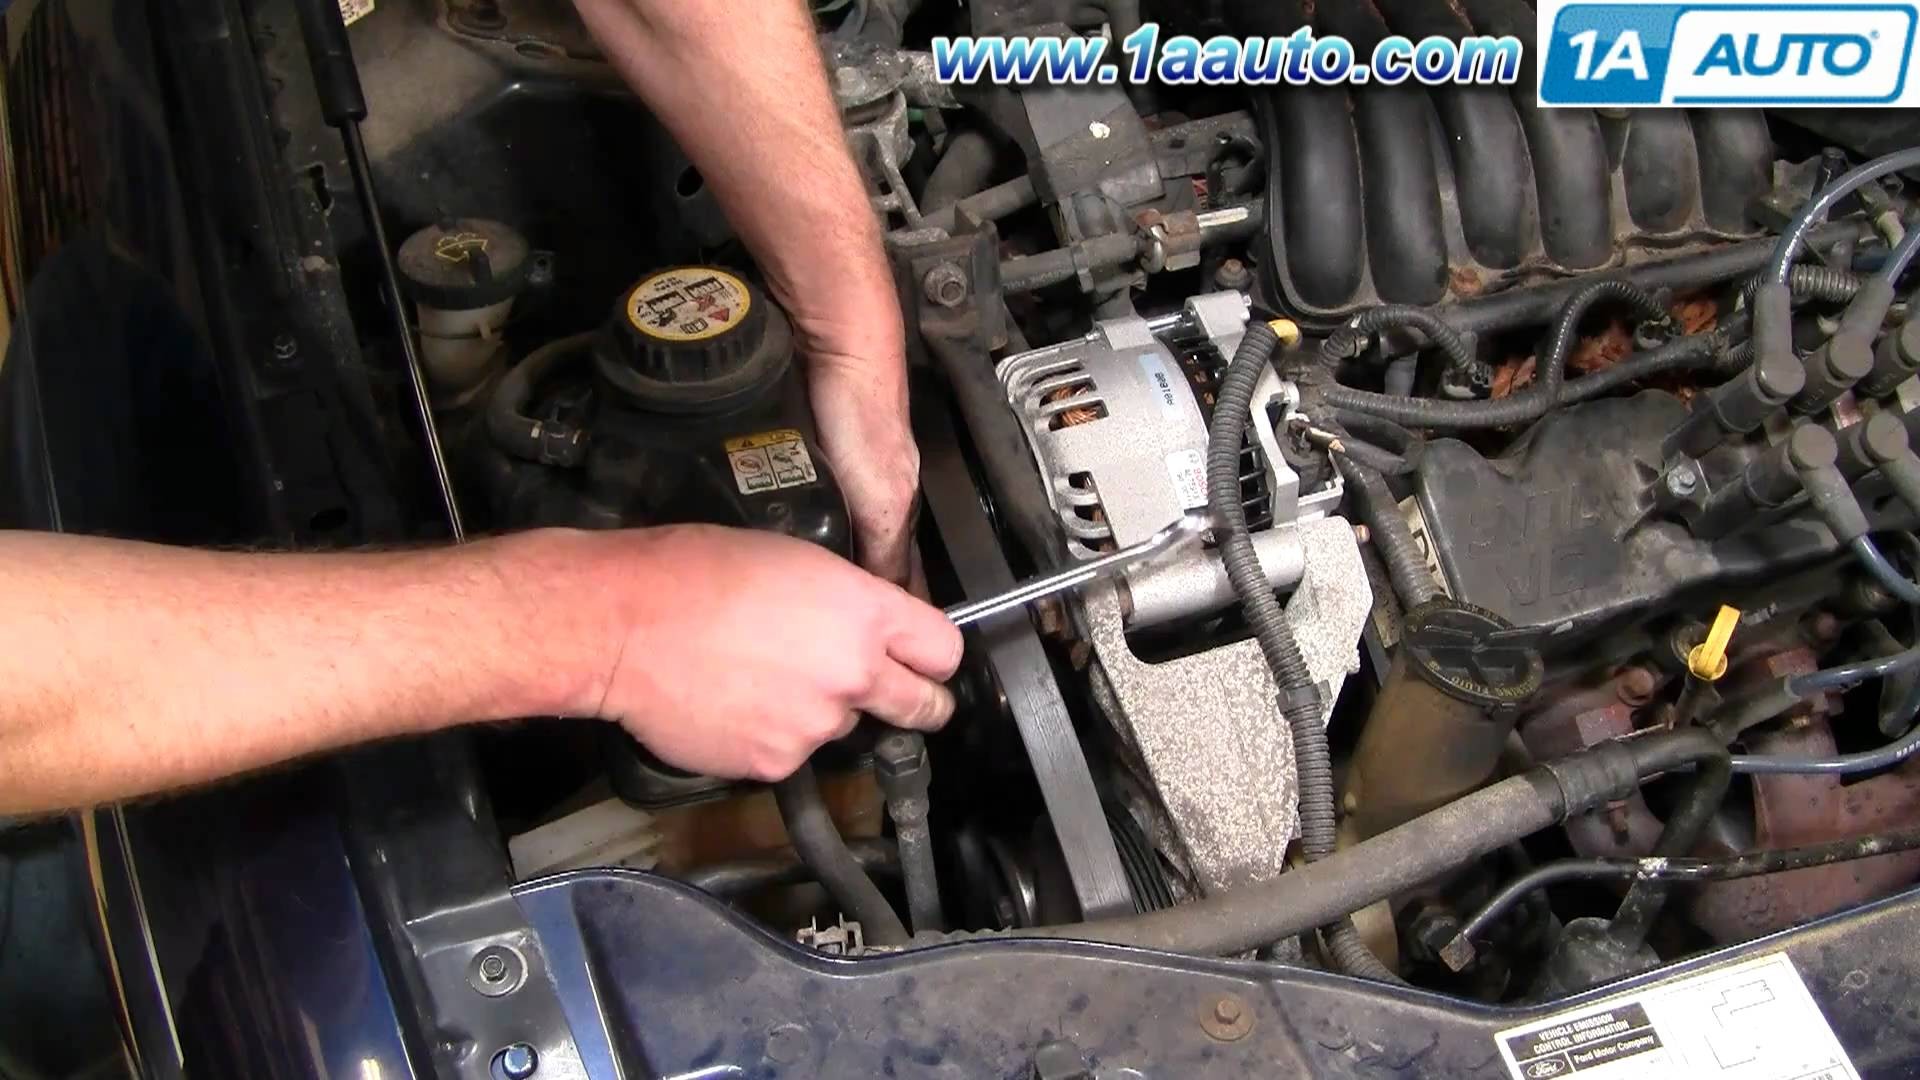 Ford Taurus Engine Diagram How to Install Replace Serpentine Belt Idler Pulley ford Taurus 3 0l